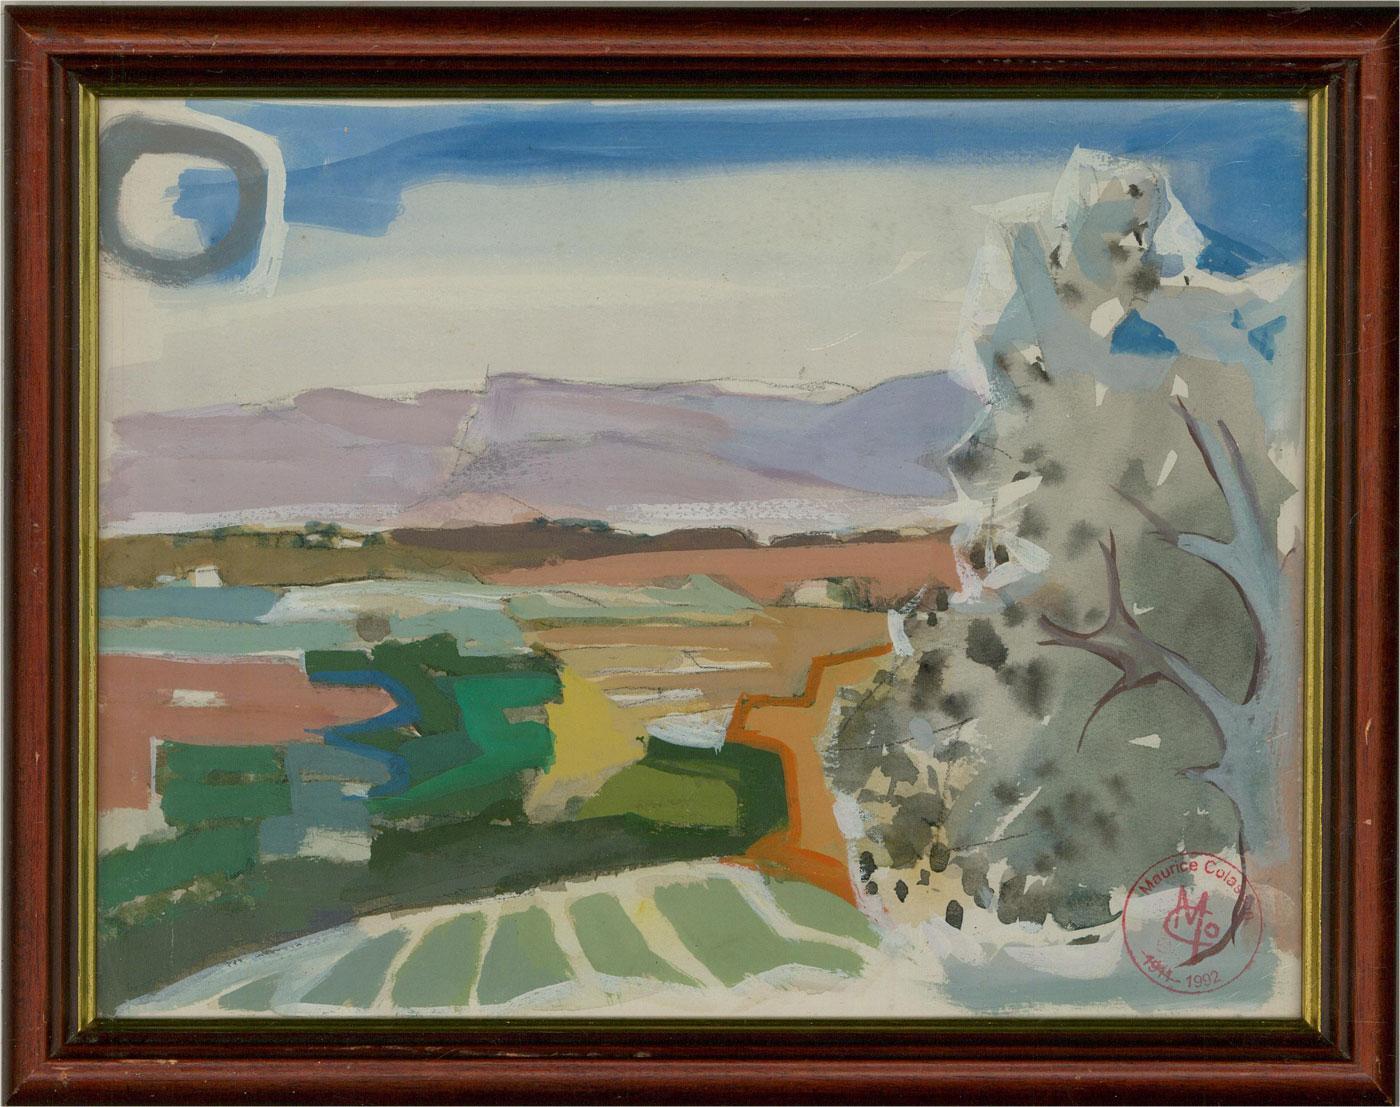 An abstract elevated view across a landscape. Presented in a wooden frame with a gilt-effect inner edge. Artist's studio stamp to the lower-right corner. On watercolour paper.
